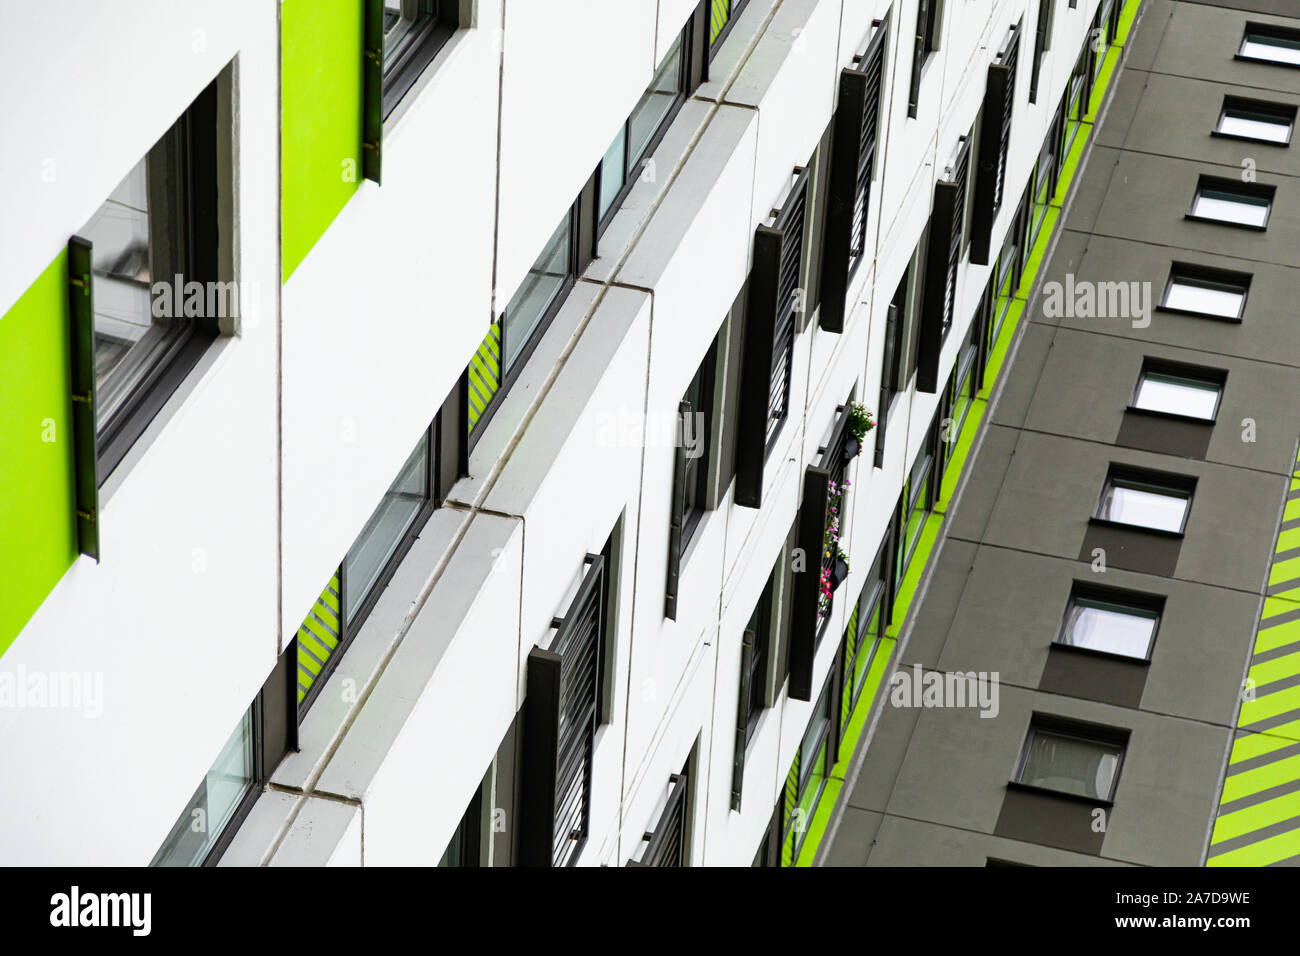 Bottom view of high new multiple dwelling of white, green and grey colors Stock Photo